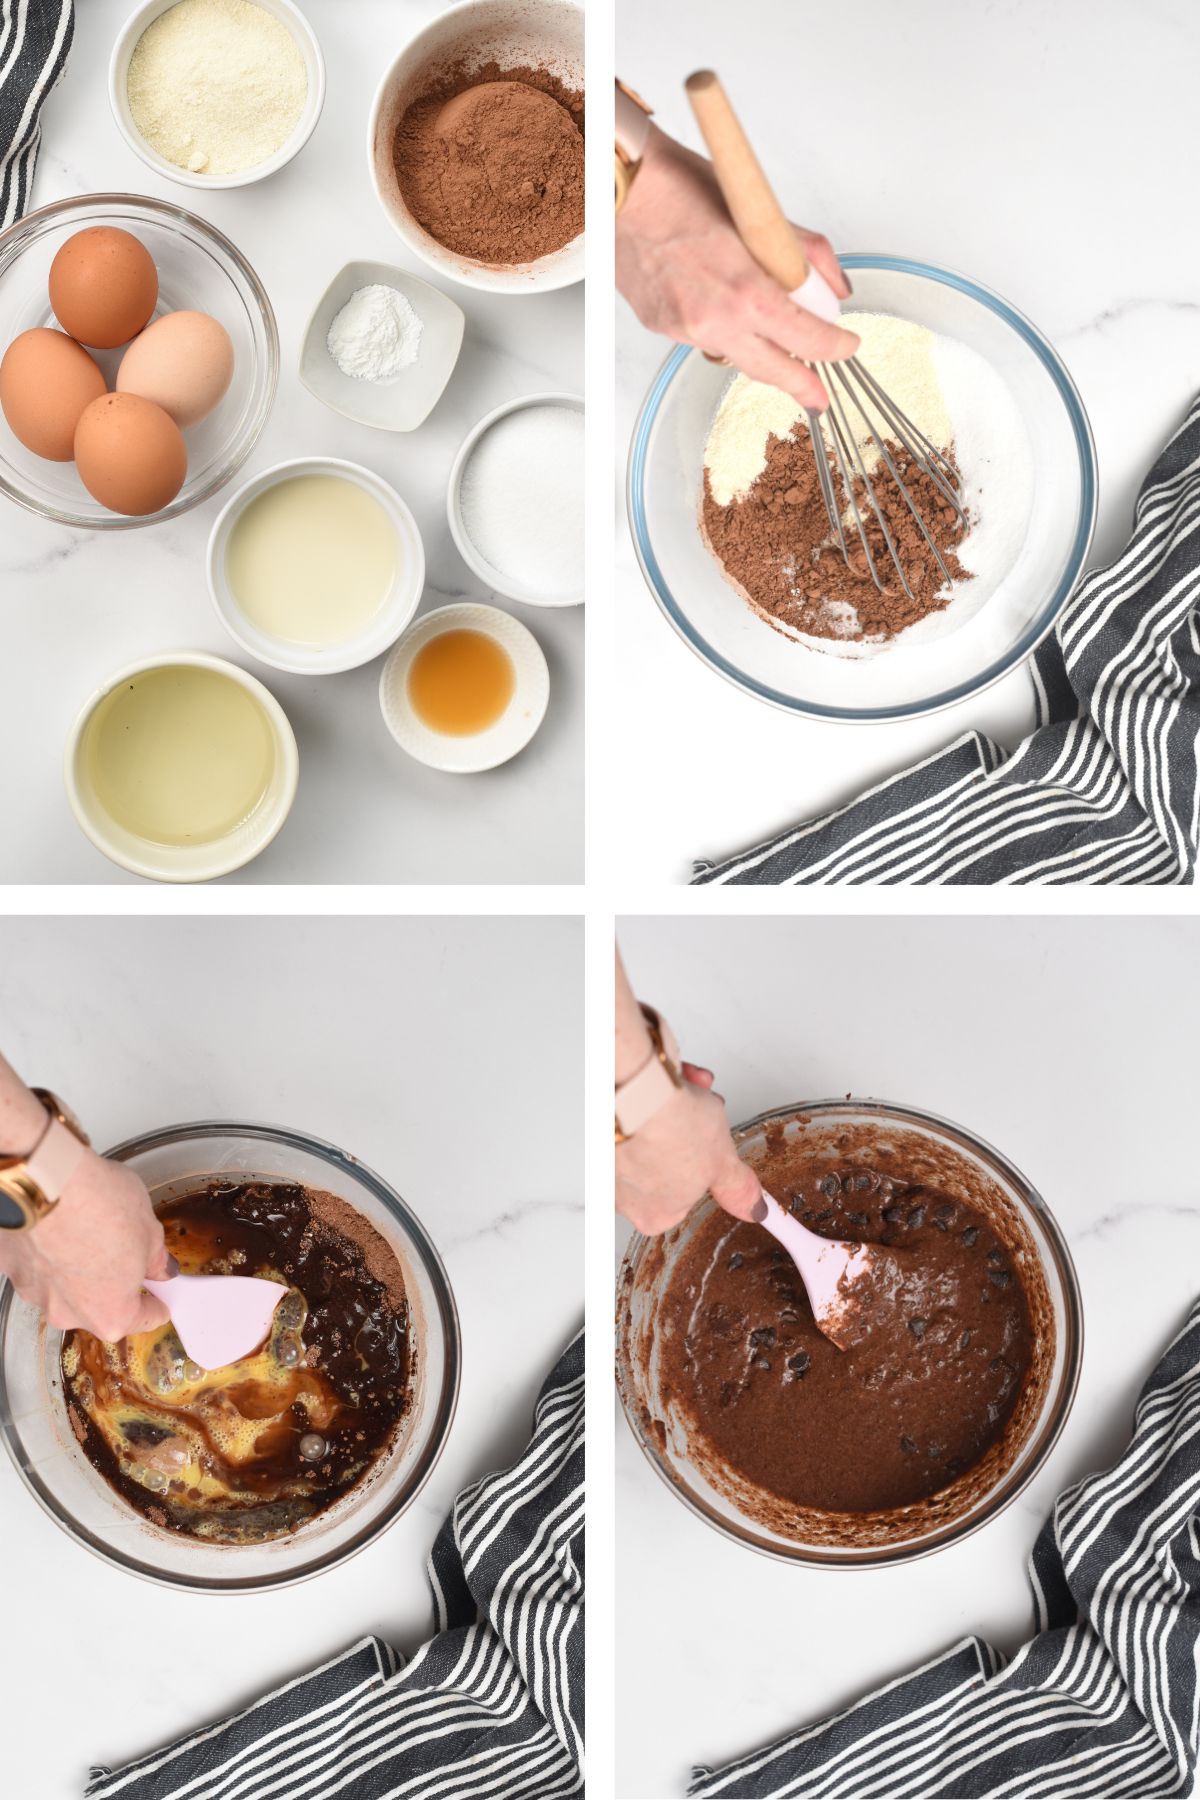 How to make Coconut Flour Brownies